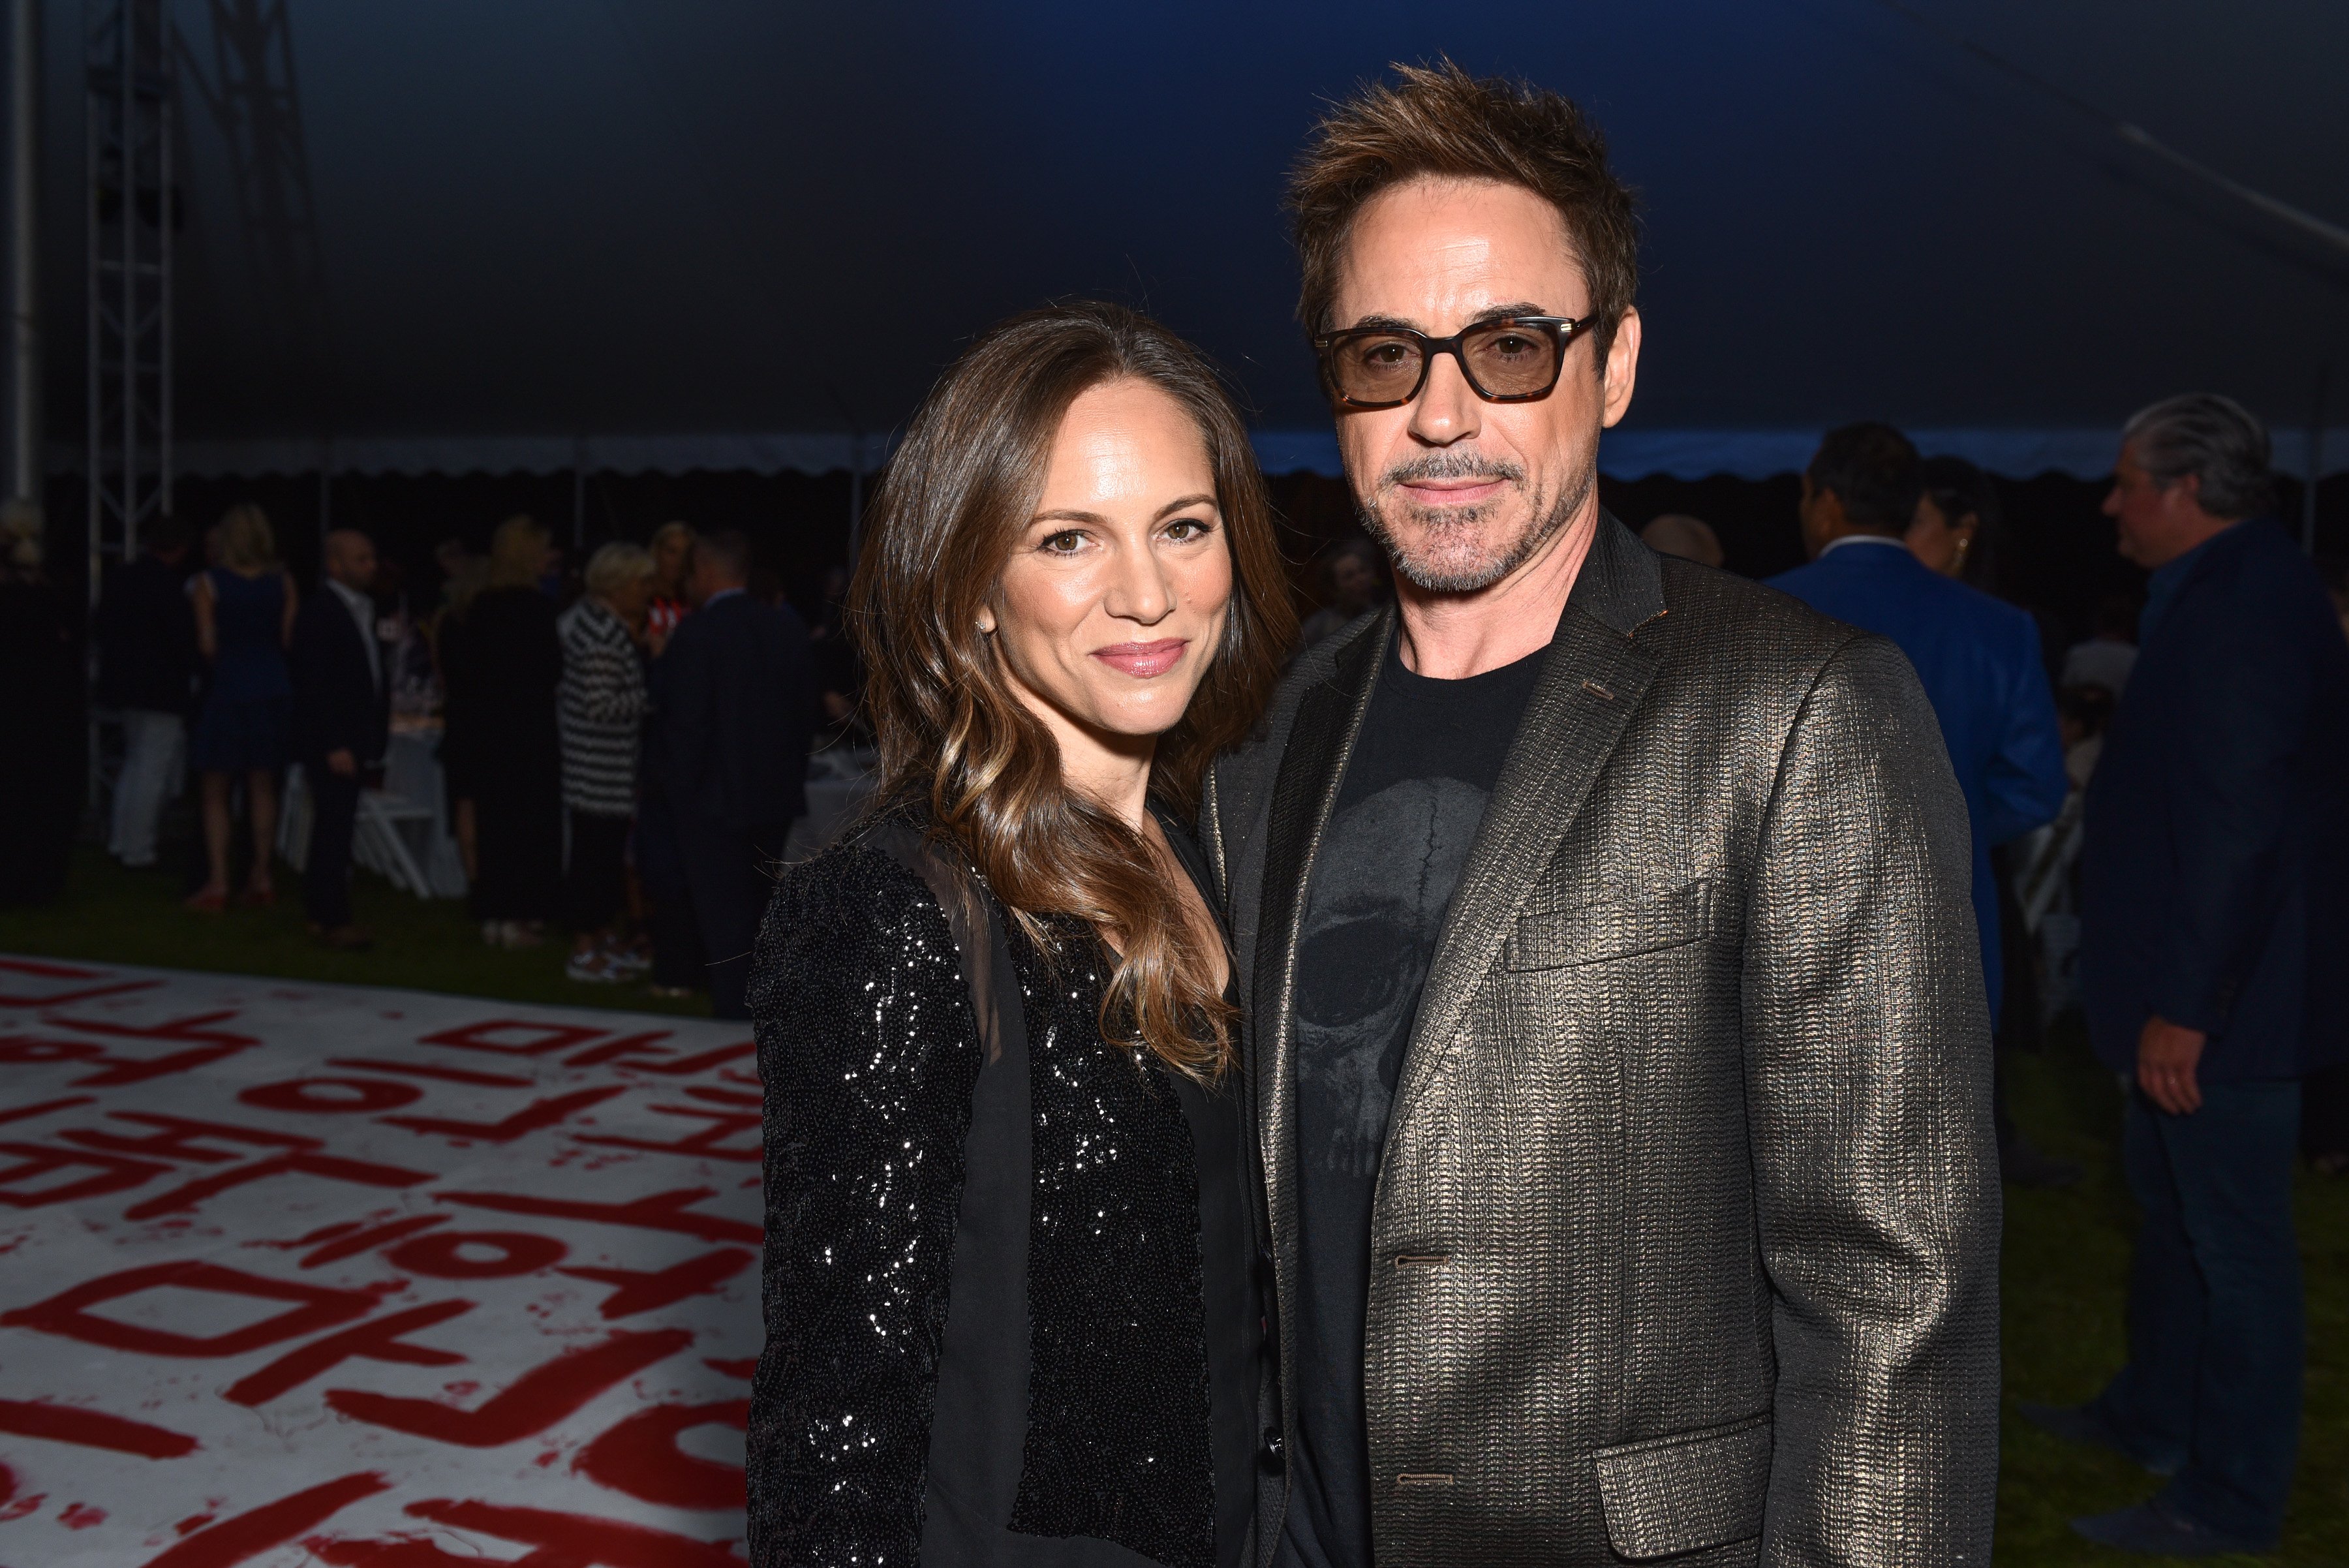 Susan Downey and Robert Downey Jr. attend The 24th Annual Watermill Center Summer Benefit & Auction at The Watermill Center on July 29, 2017, in Water Mill, New York. | Source: Getty Images